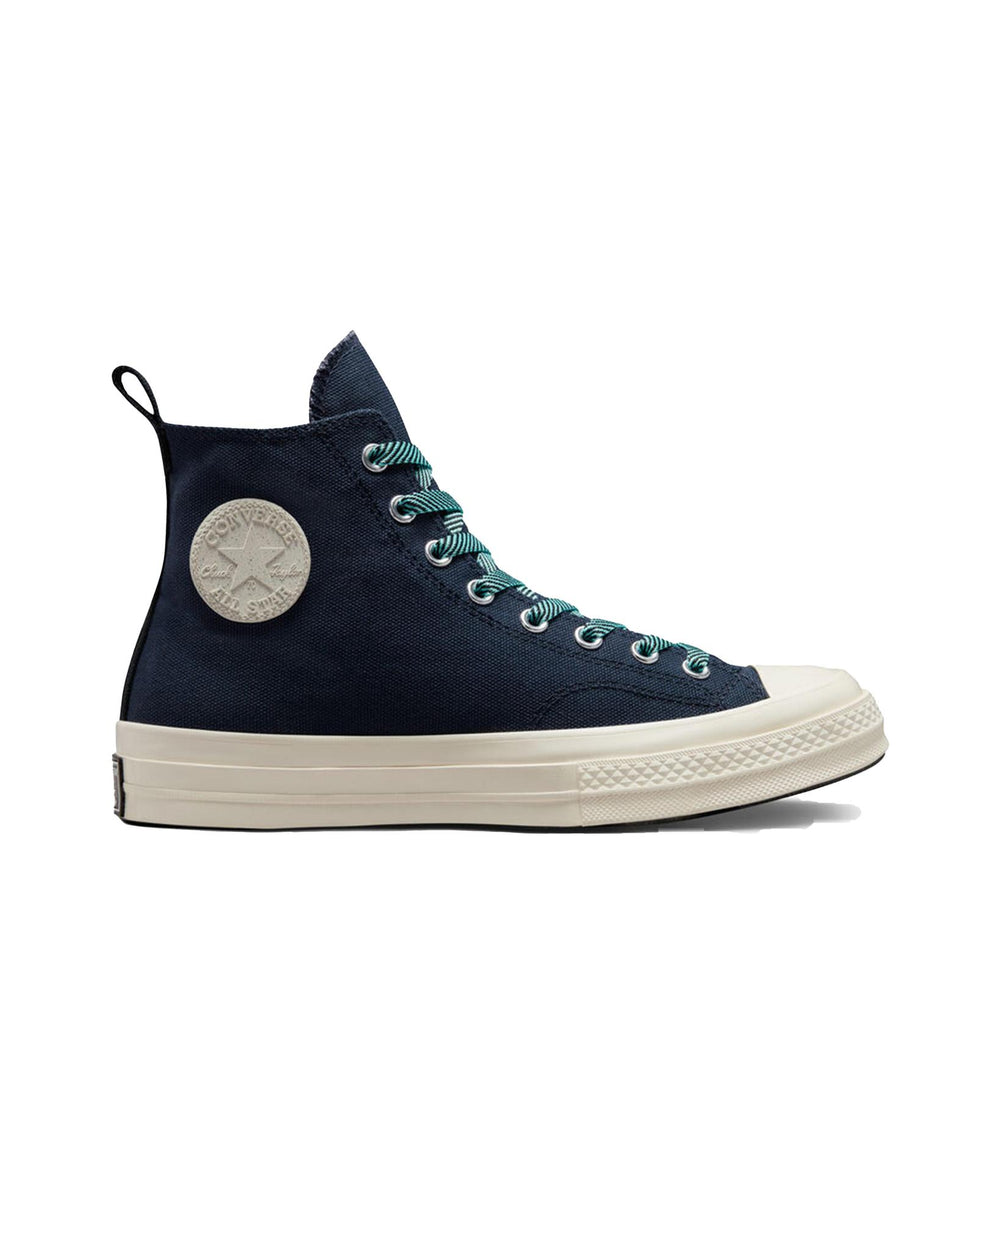 Converse Chuck 70 Gore-tex Counter Obsidian | STASHED